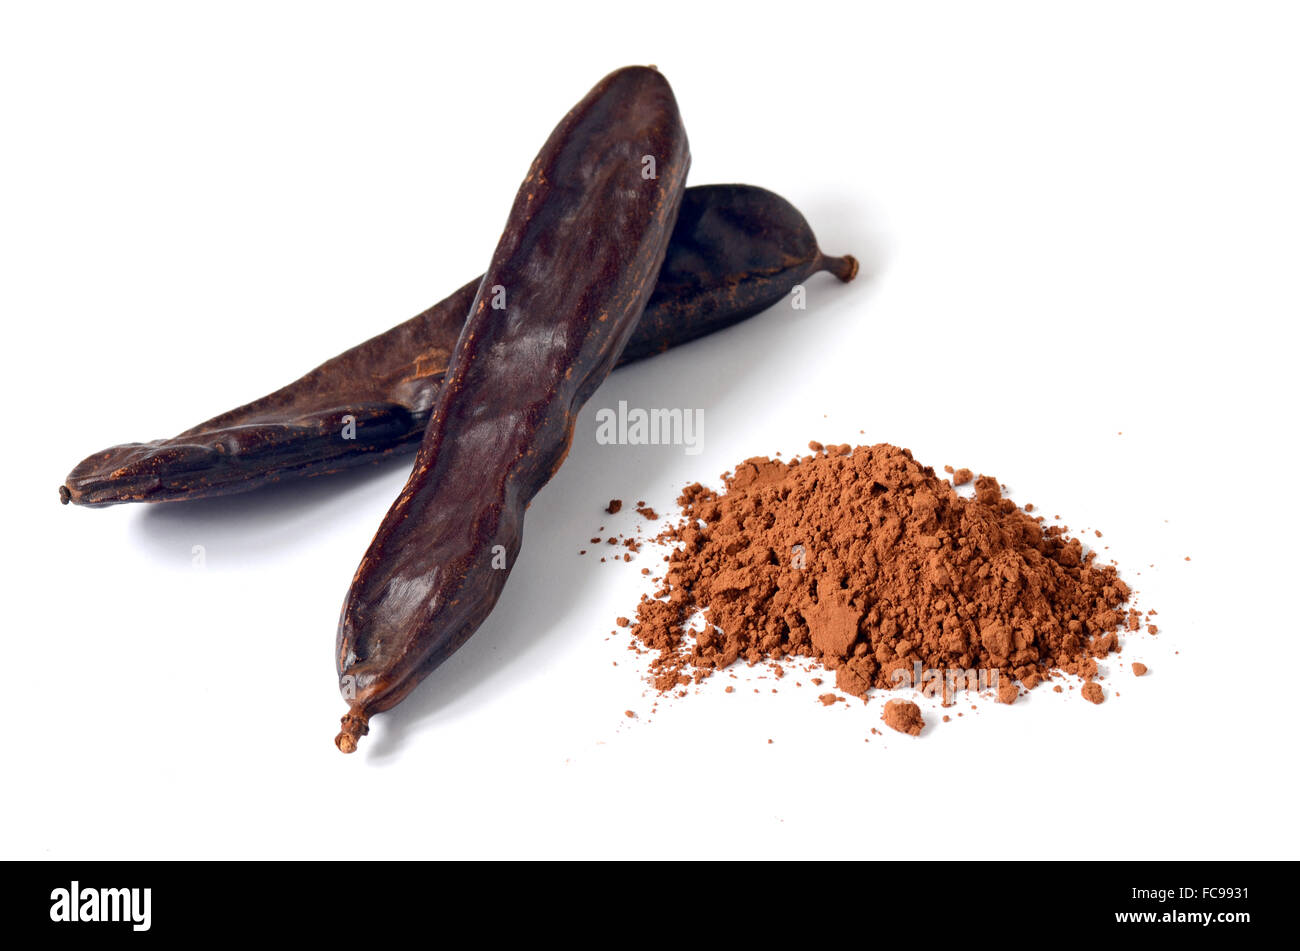 Ripe carob pods and carob powder, can be used as a substitute for cocoa Stock Photo